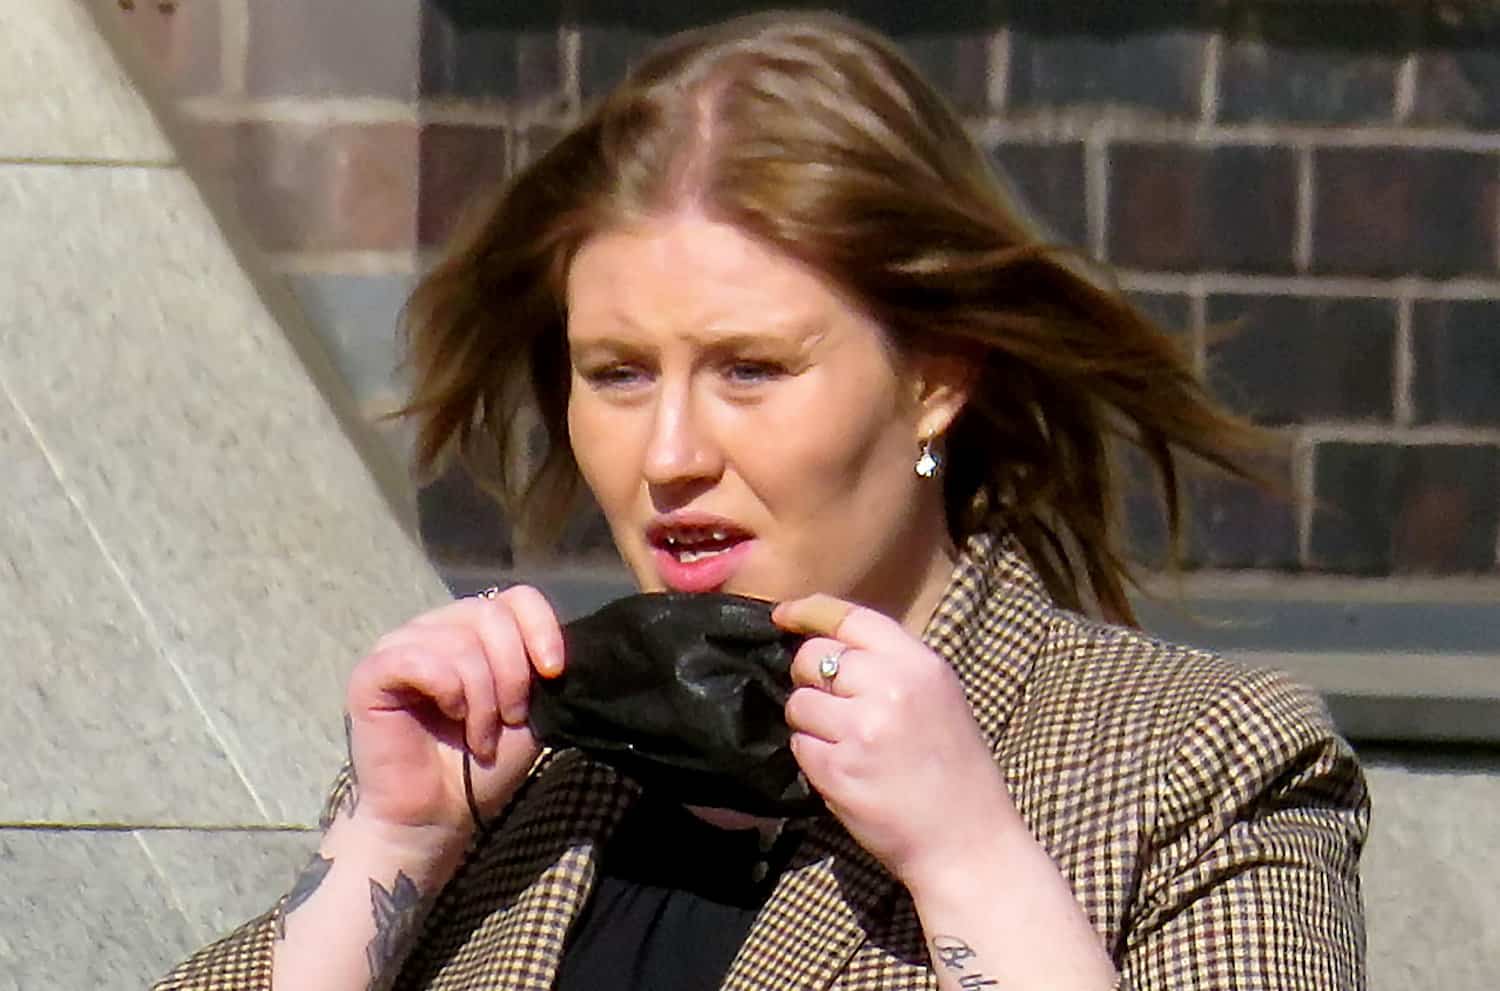 Drunk and drugged-up pregnant woman who spat blood in paramedic’s eye and attacked three cops is spared jail